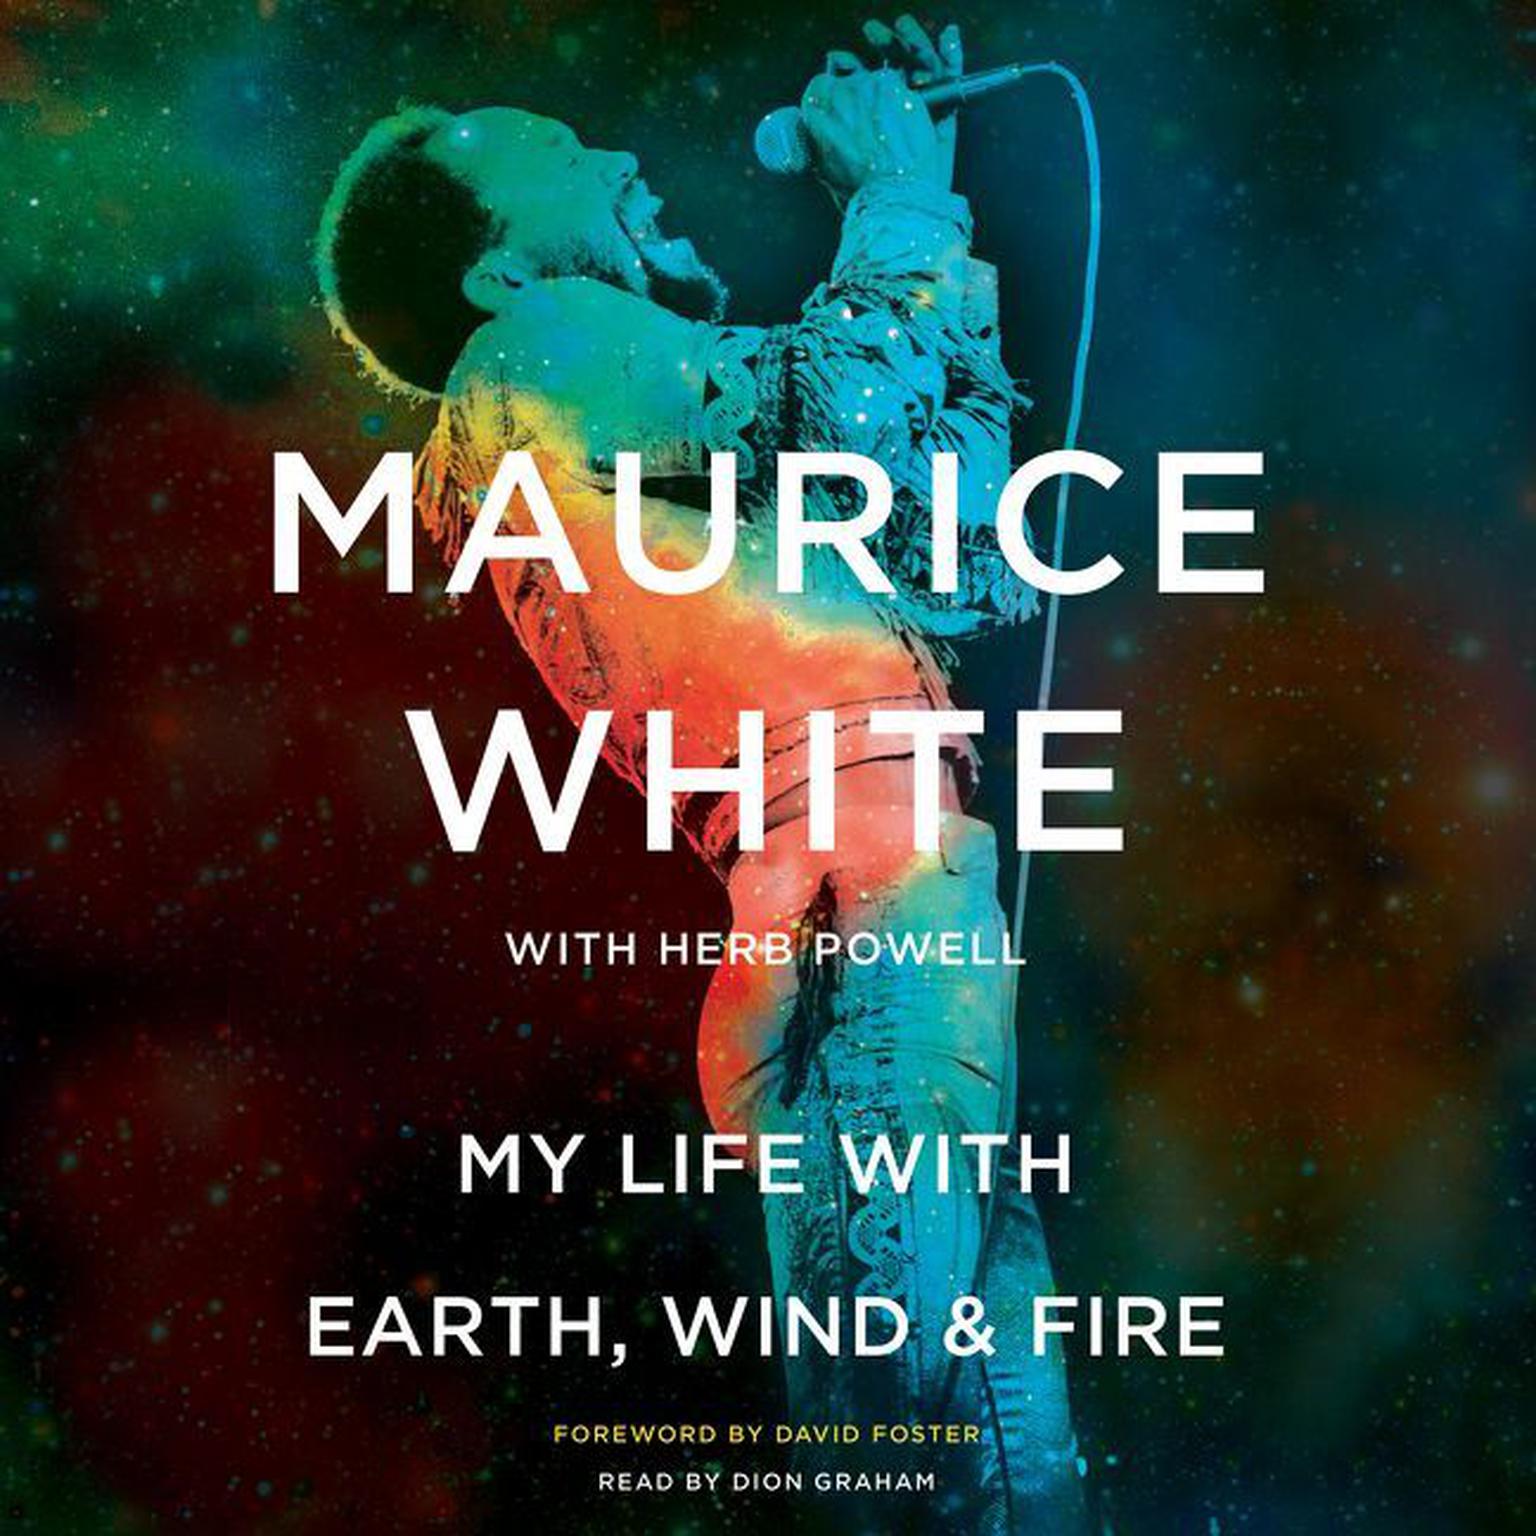 My Life with Earth, Wind & Fire Audiobook, by Maurice White